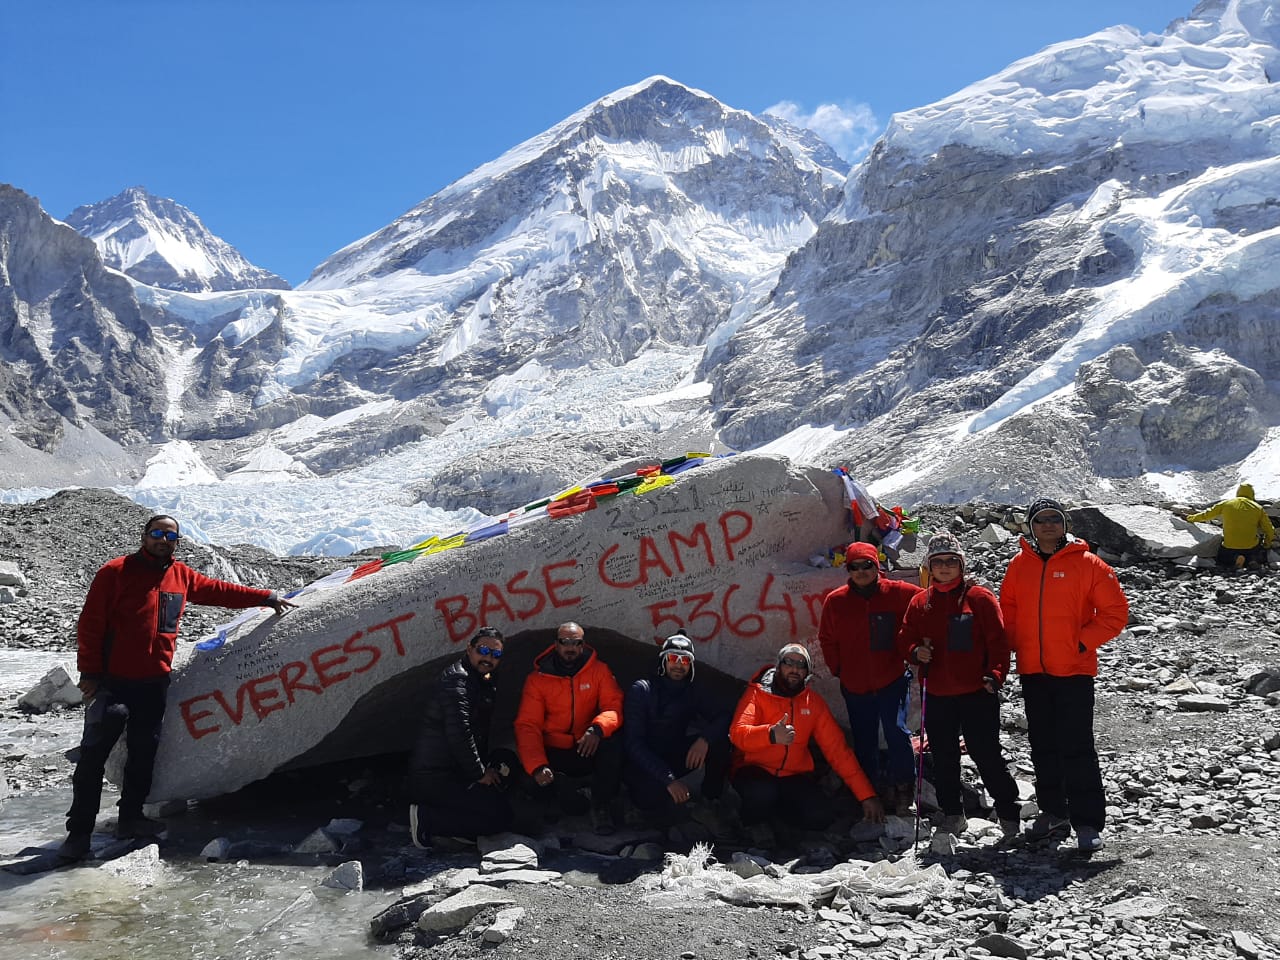 The joint team posing at Everest Base Camp.